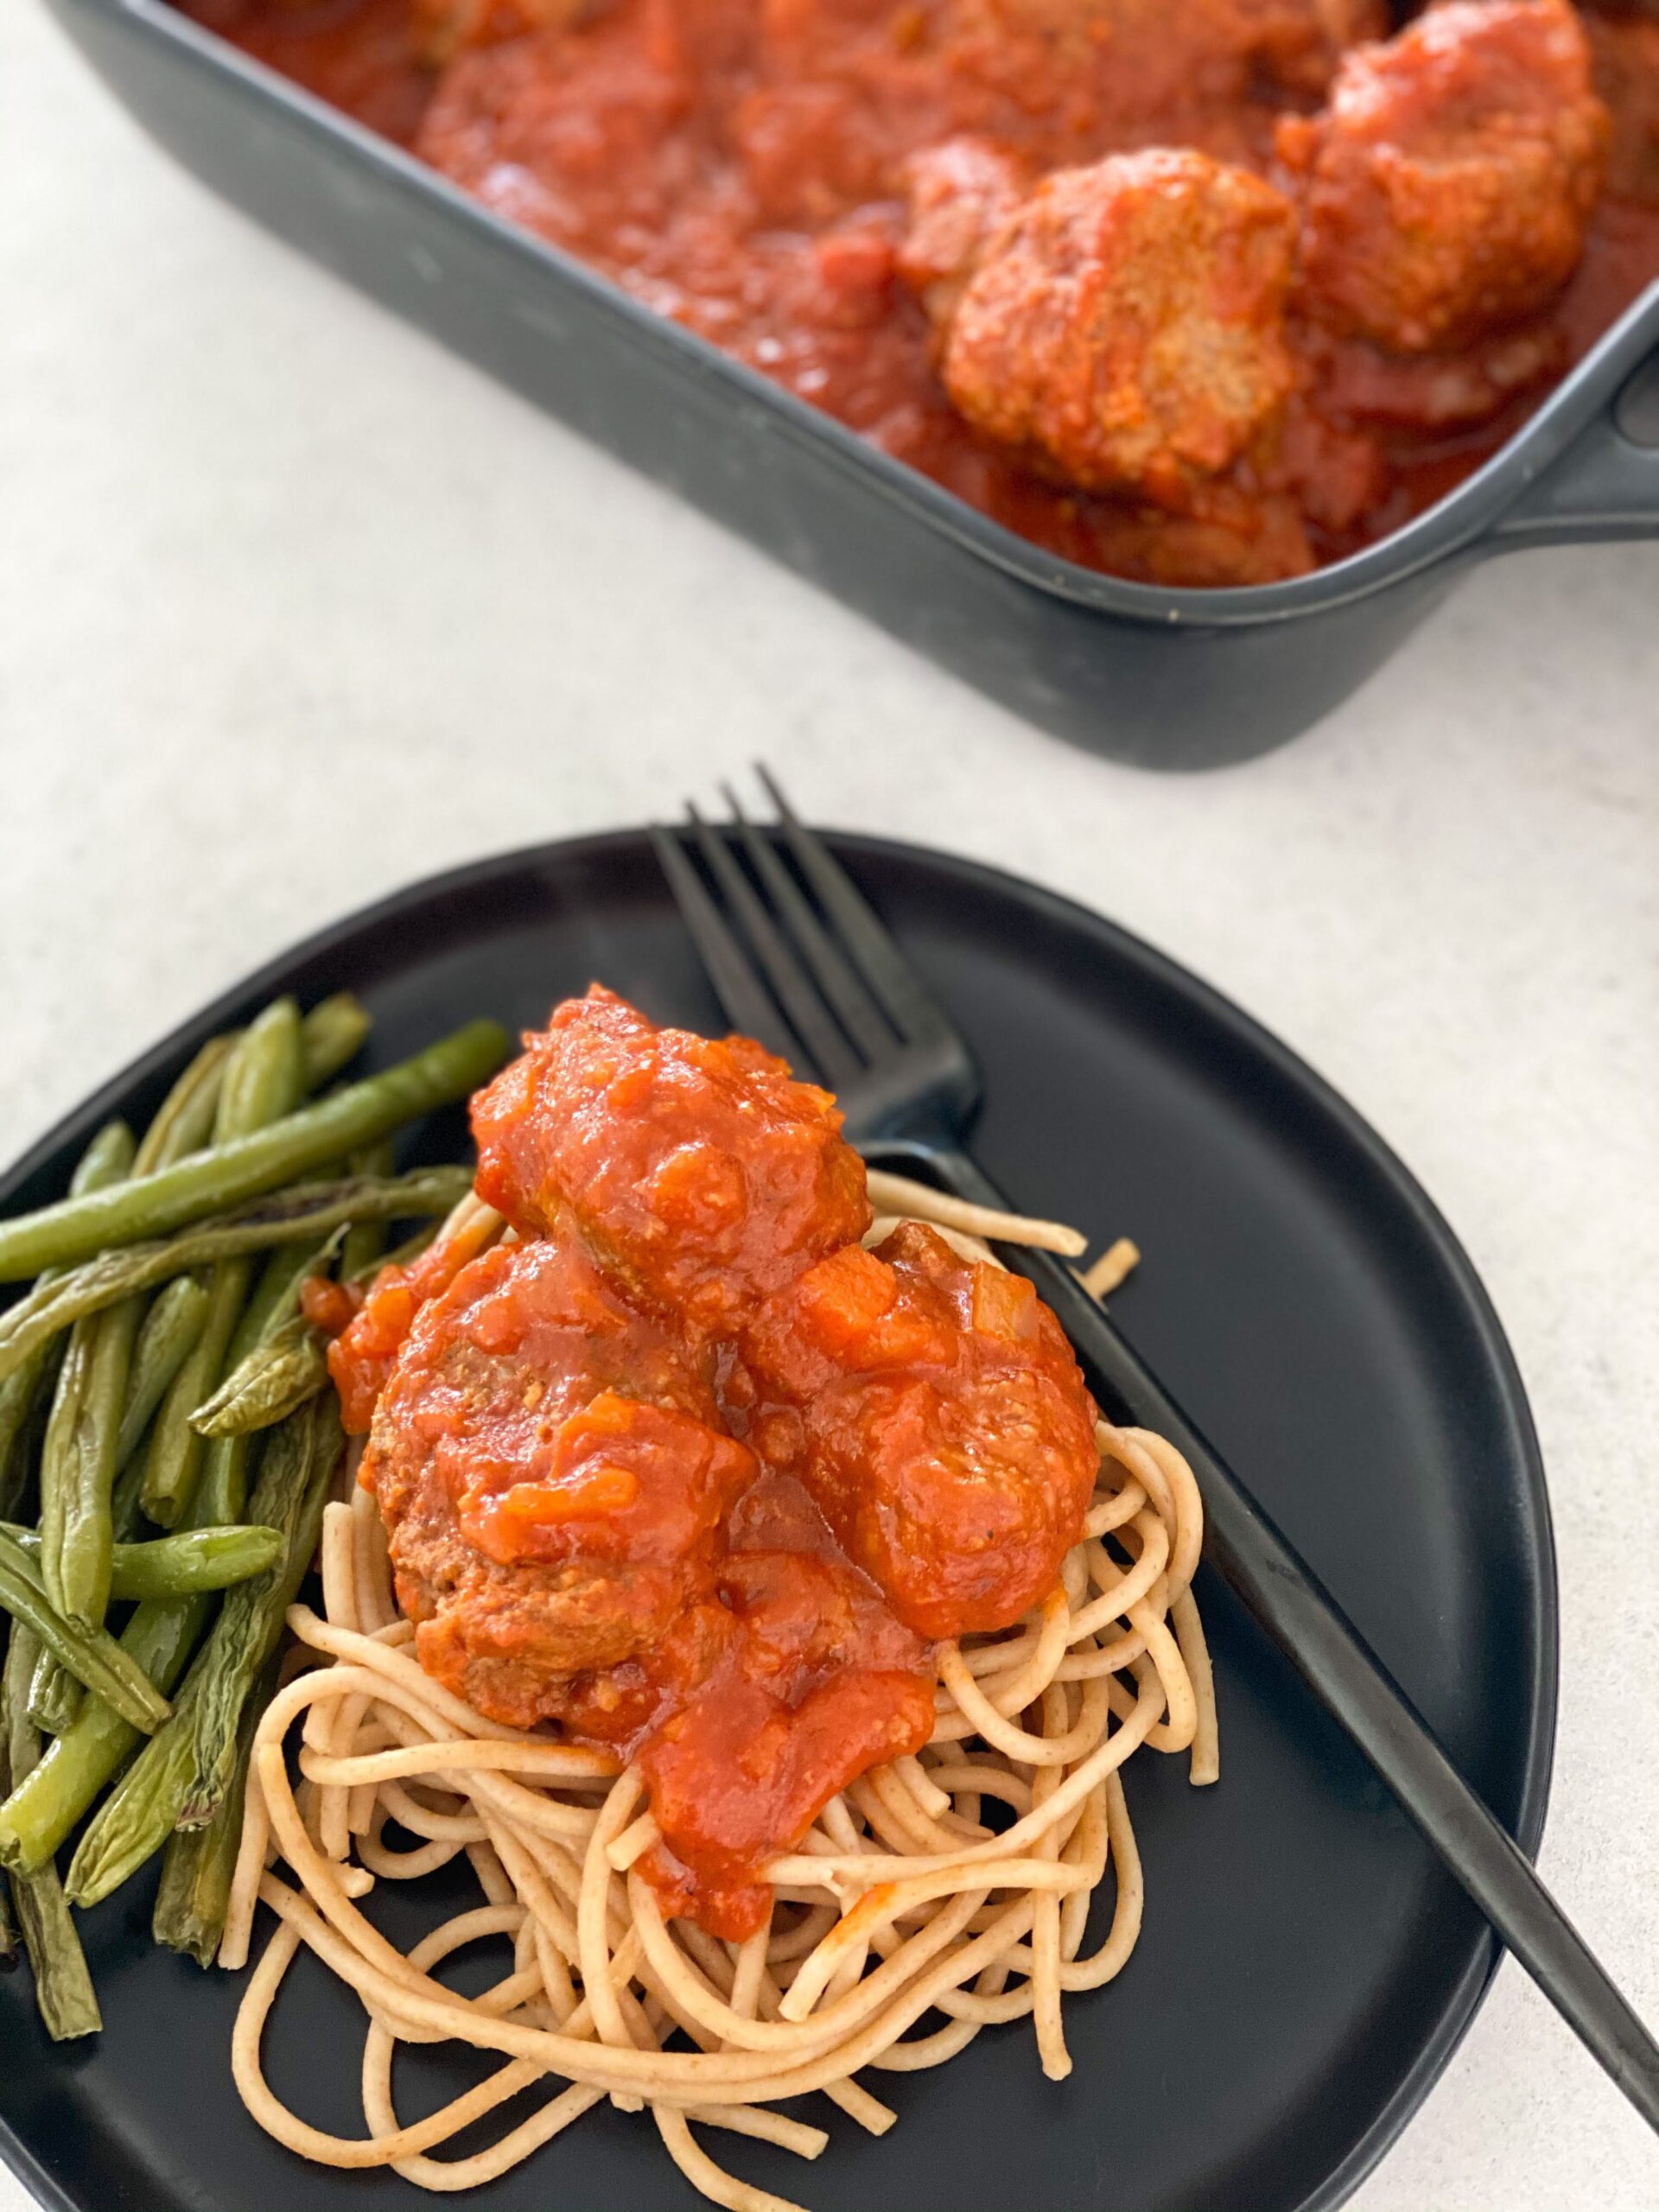 How to Make the Best Eggless Meatballs and Spaghetti